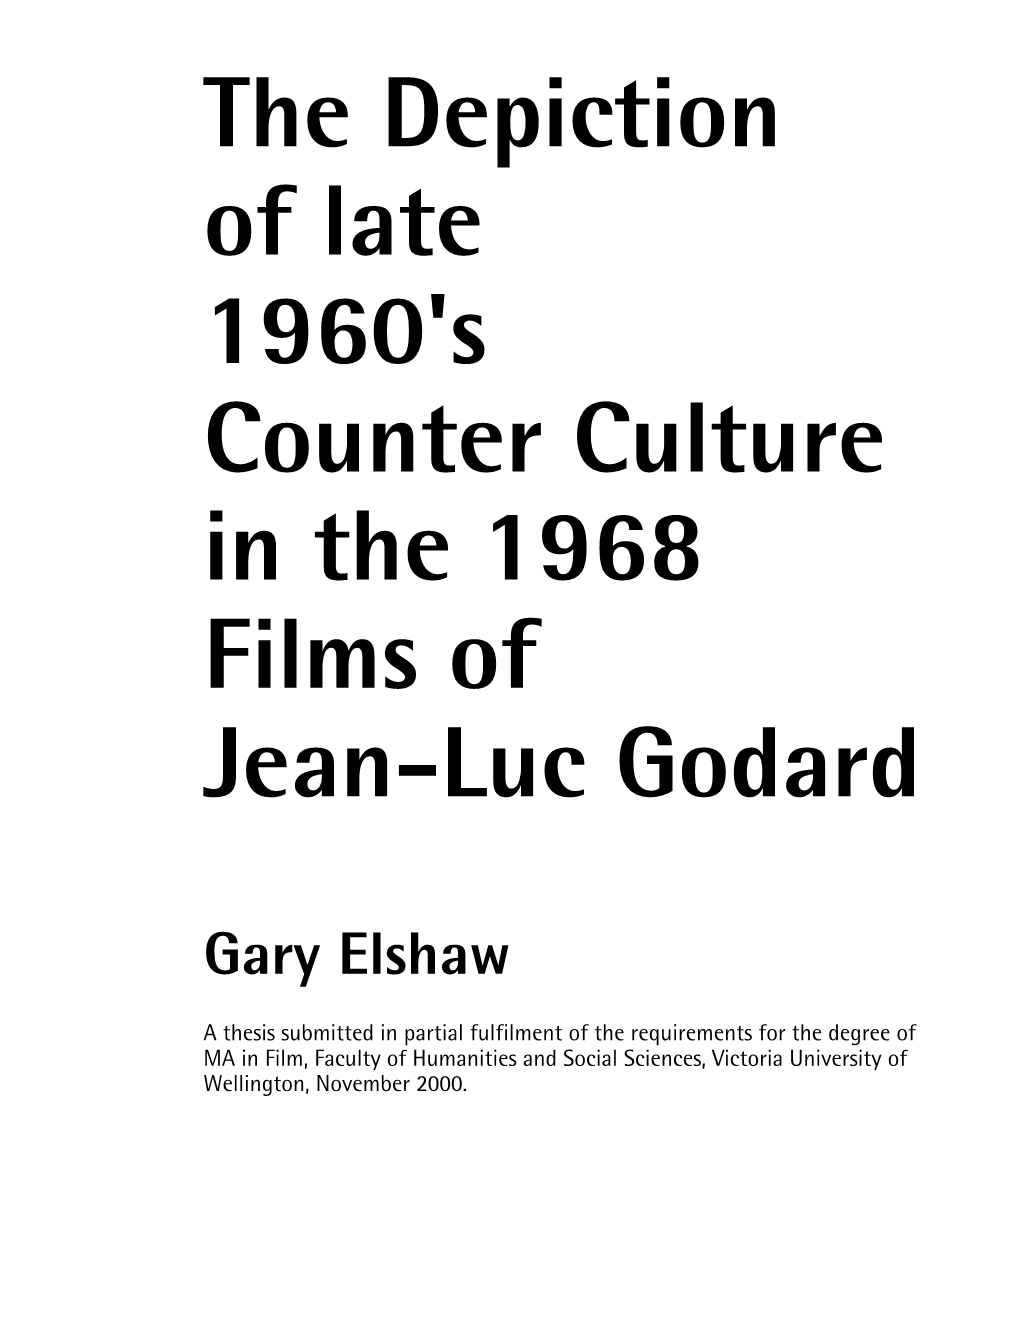 The Depiction of Late 1960'S Counter Culture in the 1968 Films of Jean-Luc Godard